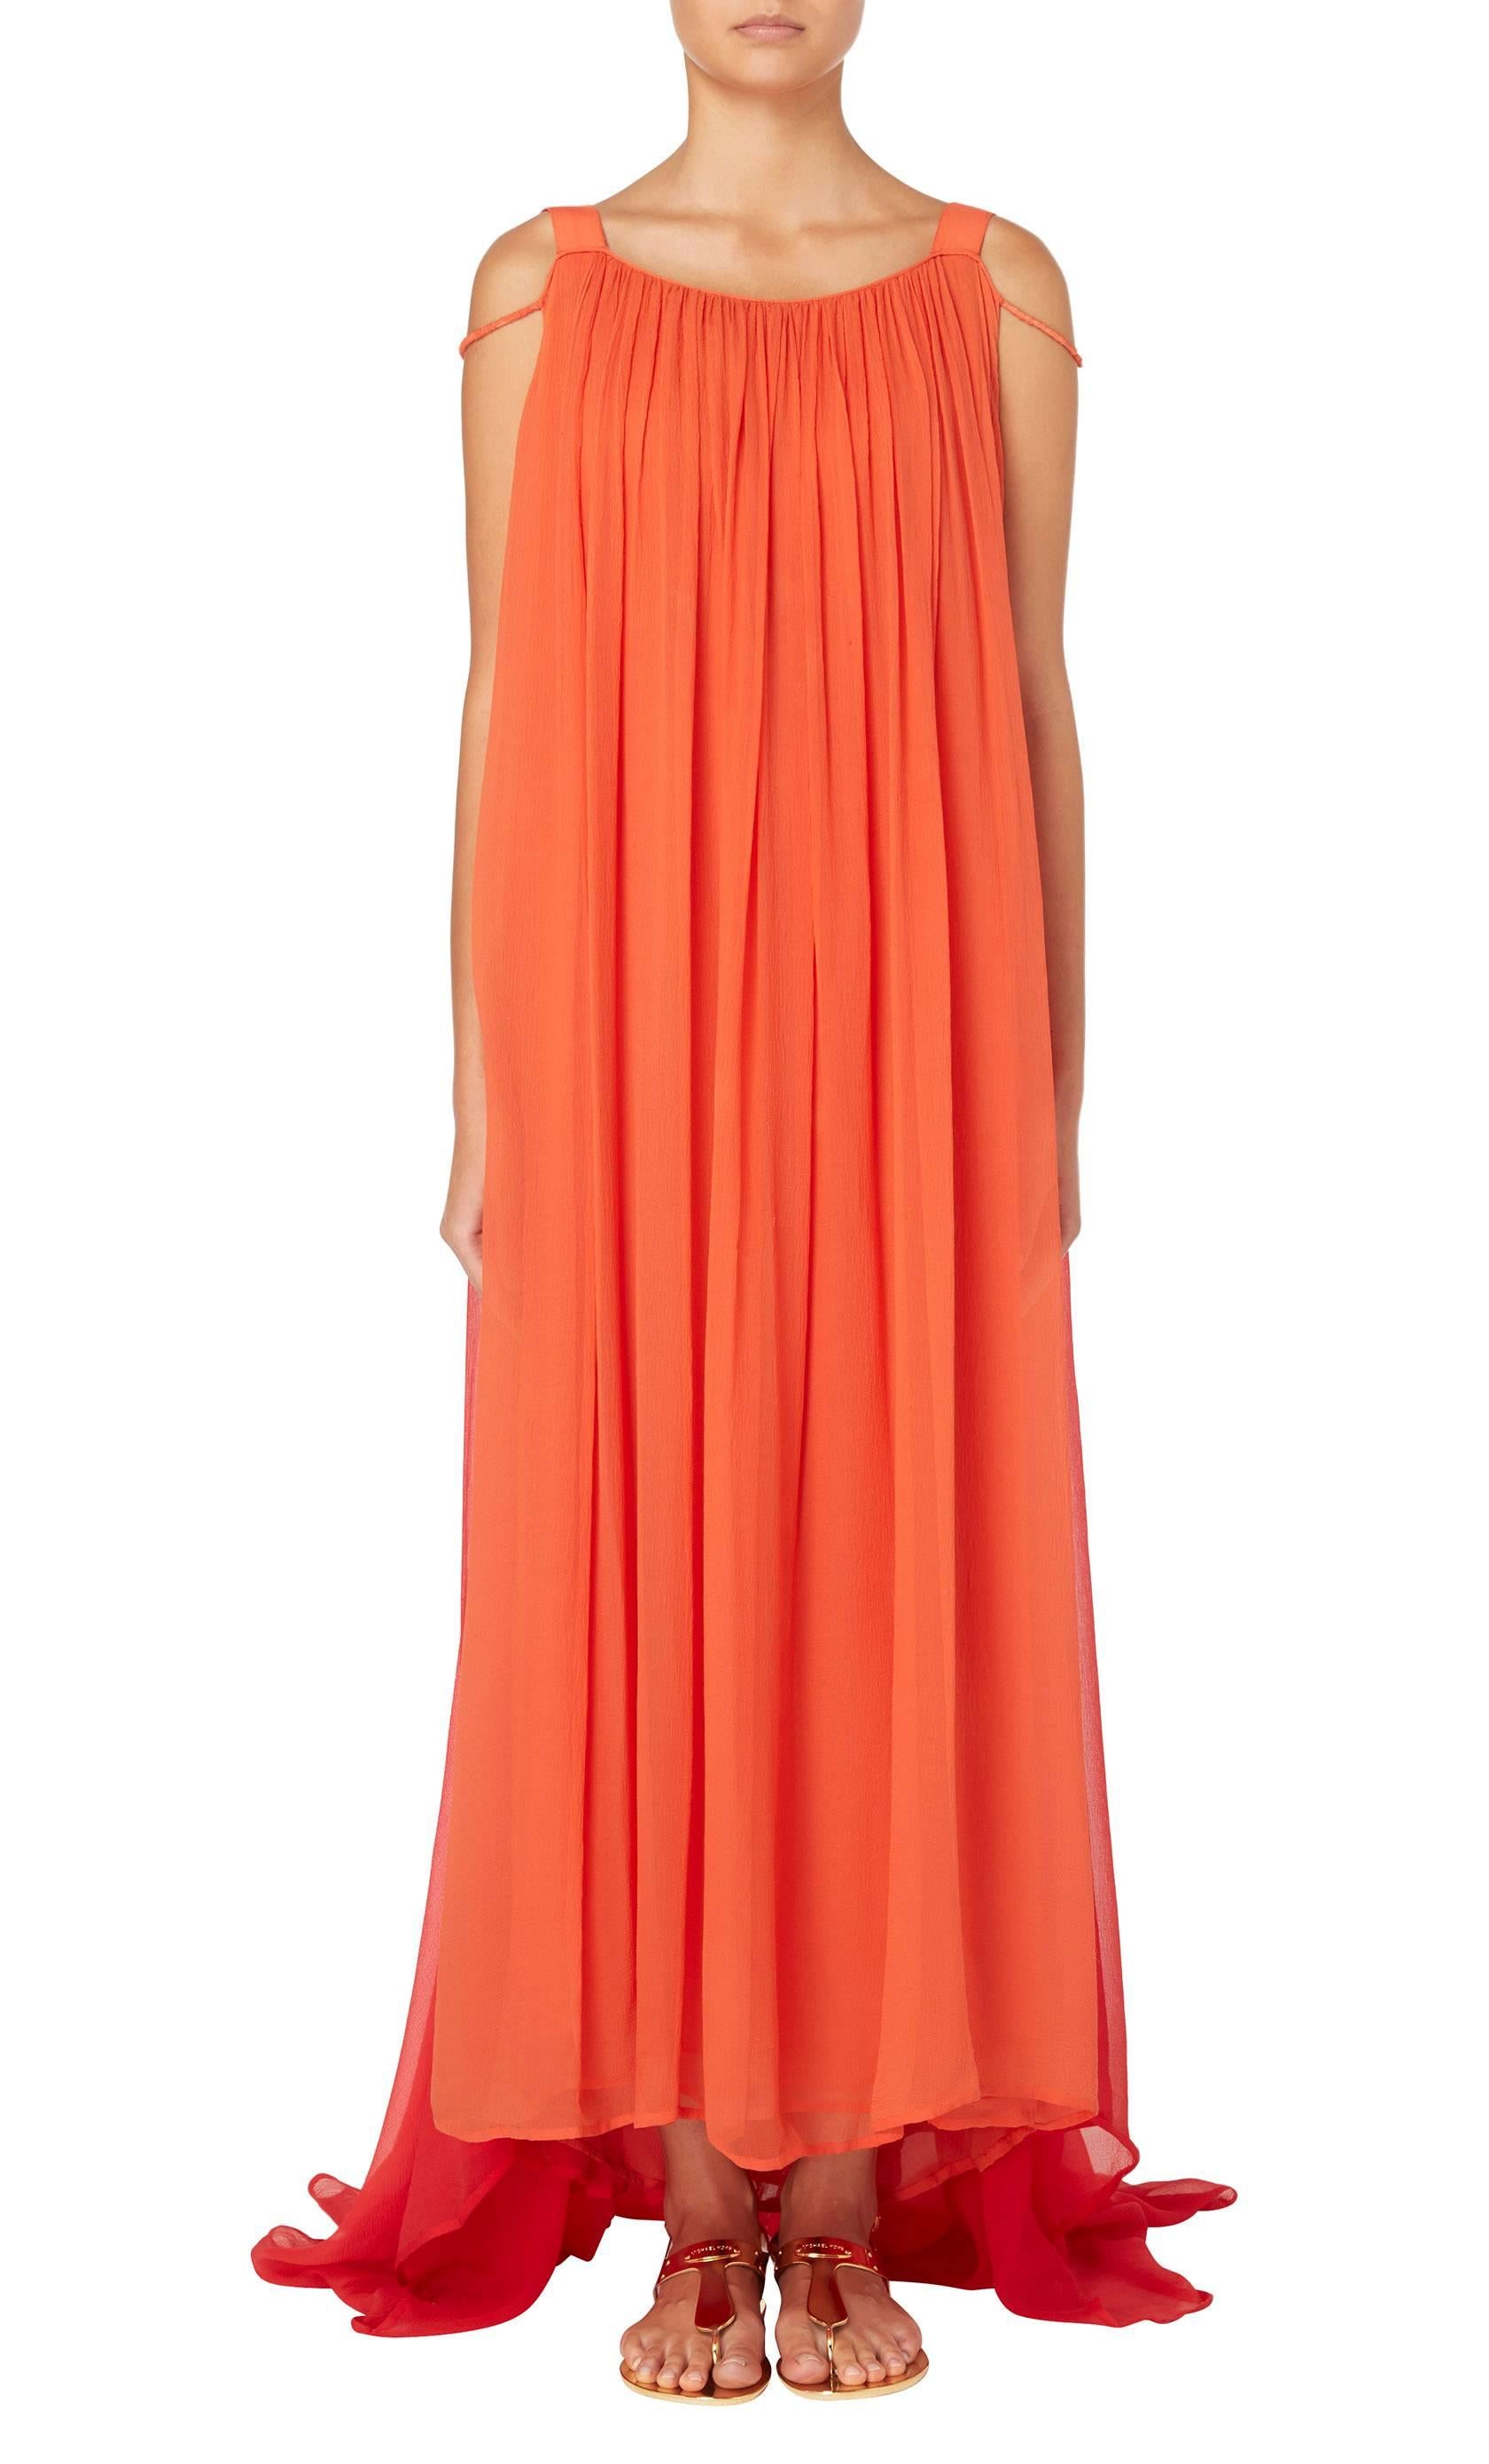 Constructed in layers of orange silk chiffon, this Yves Saint Laurent haute couture maxi dress features wide shoulder straps and a round neckline, plunging lower to the back. A layer of red chiffon creates a Watteau back, pooling into a train at the